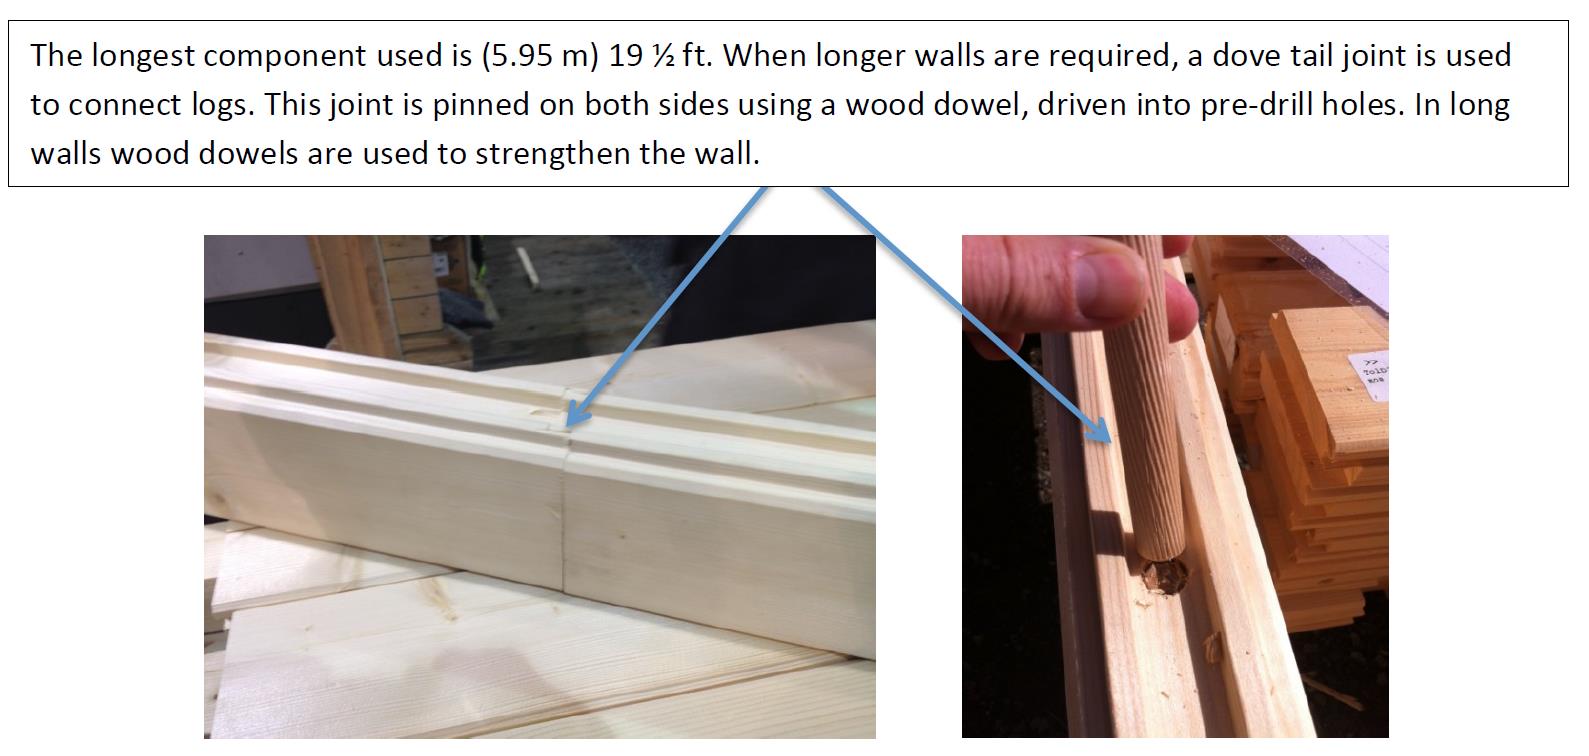 Length of wall logs. When longer walls are required, a dove tail joint is used to connect logs. This joint is pinned on both sides using a wood dowel, driven into pre-drill holes. In long walls wood dowels are used to strengthen the wall. Do it yourself building kits. EZ Log Structures.